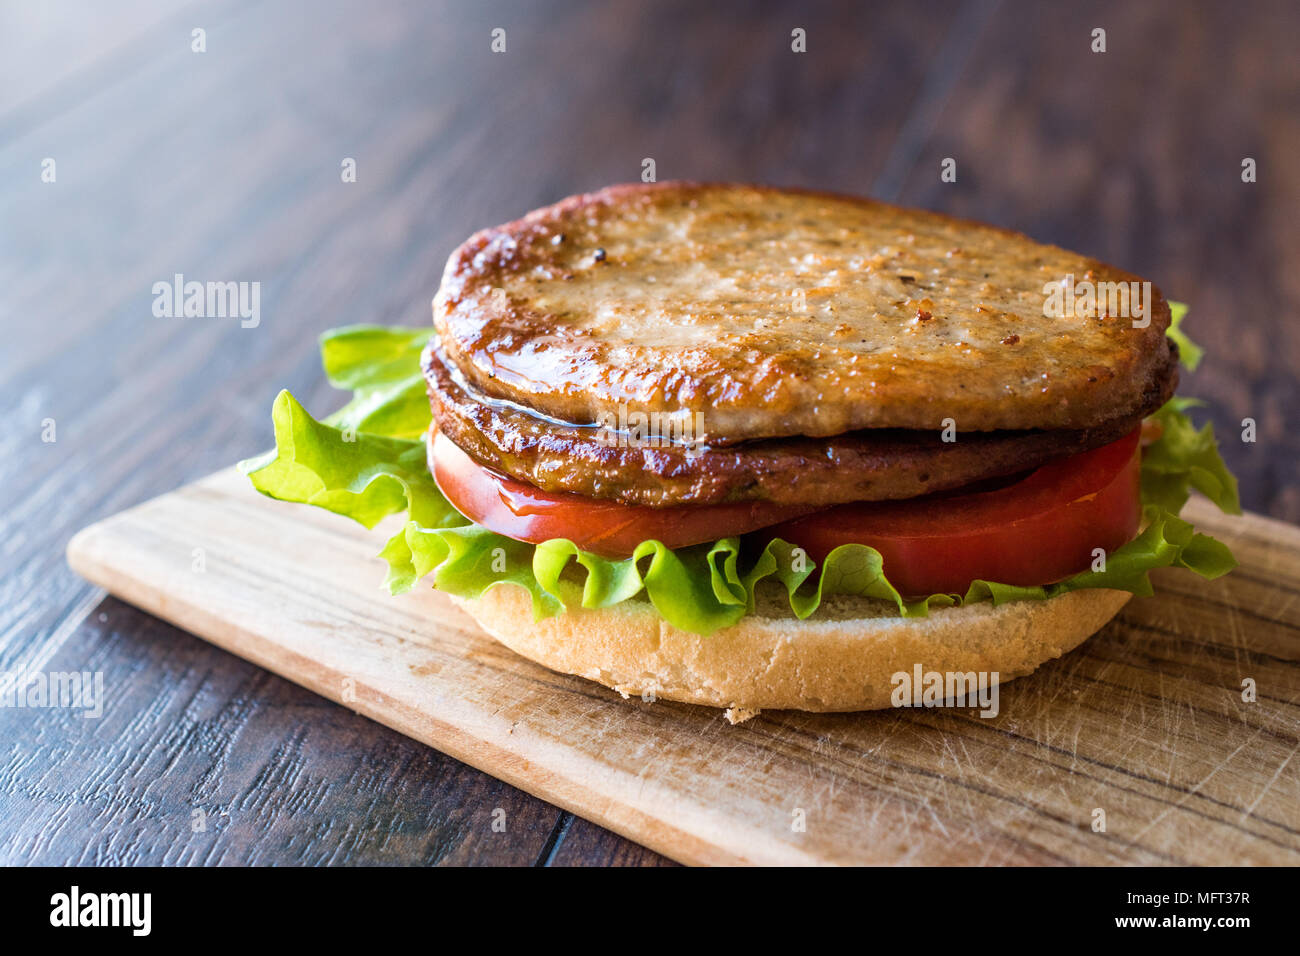 Open Double Burger with Turkey Meat, Lettuce and Tomatoes on Wooden Surface. FastFood Concept. Stock Photo